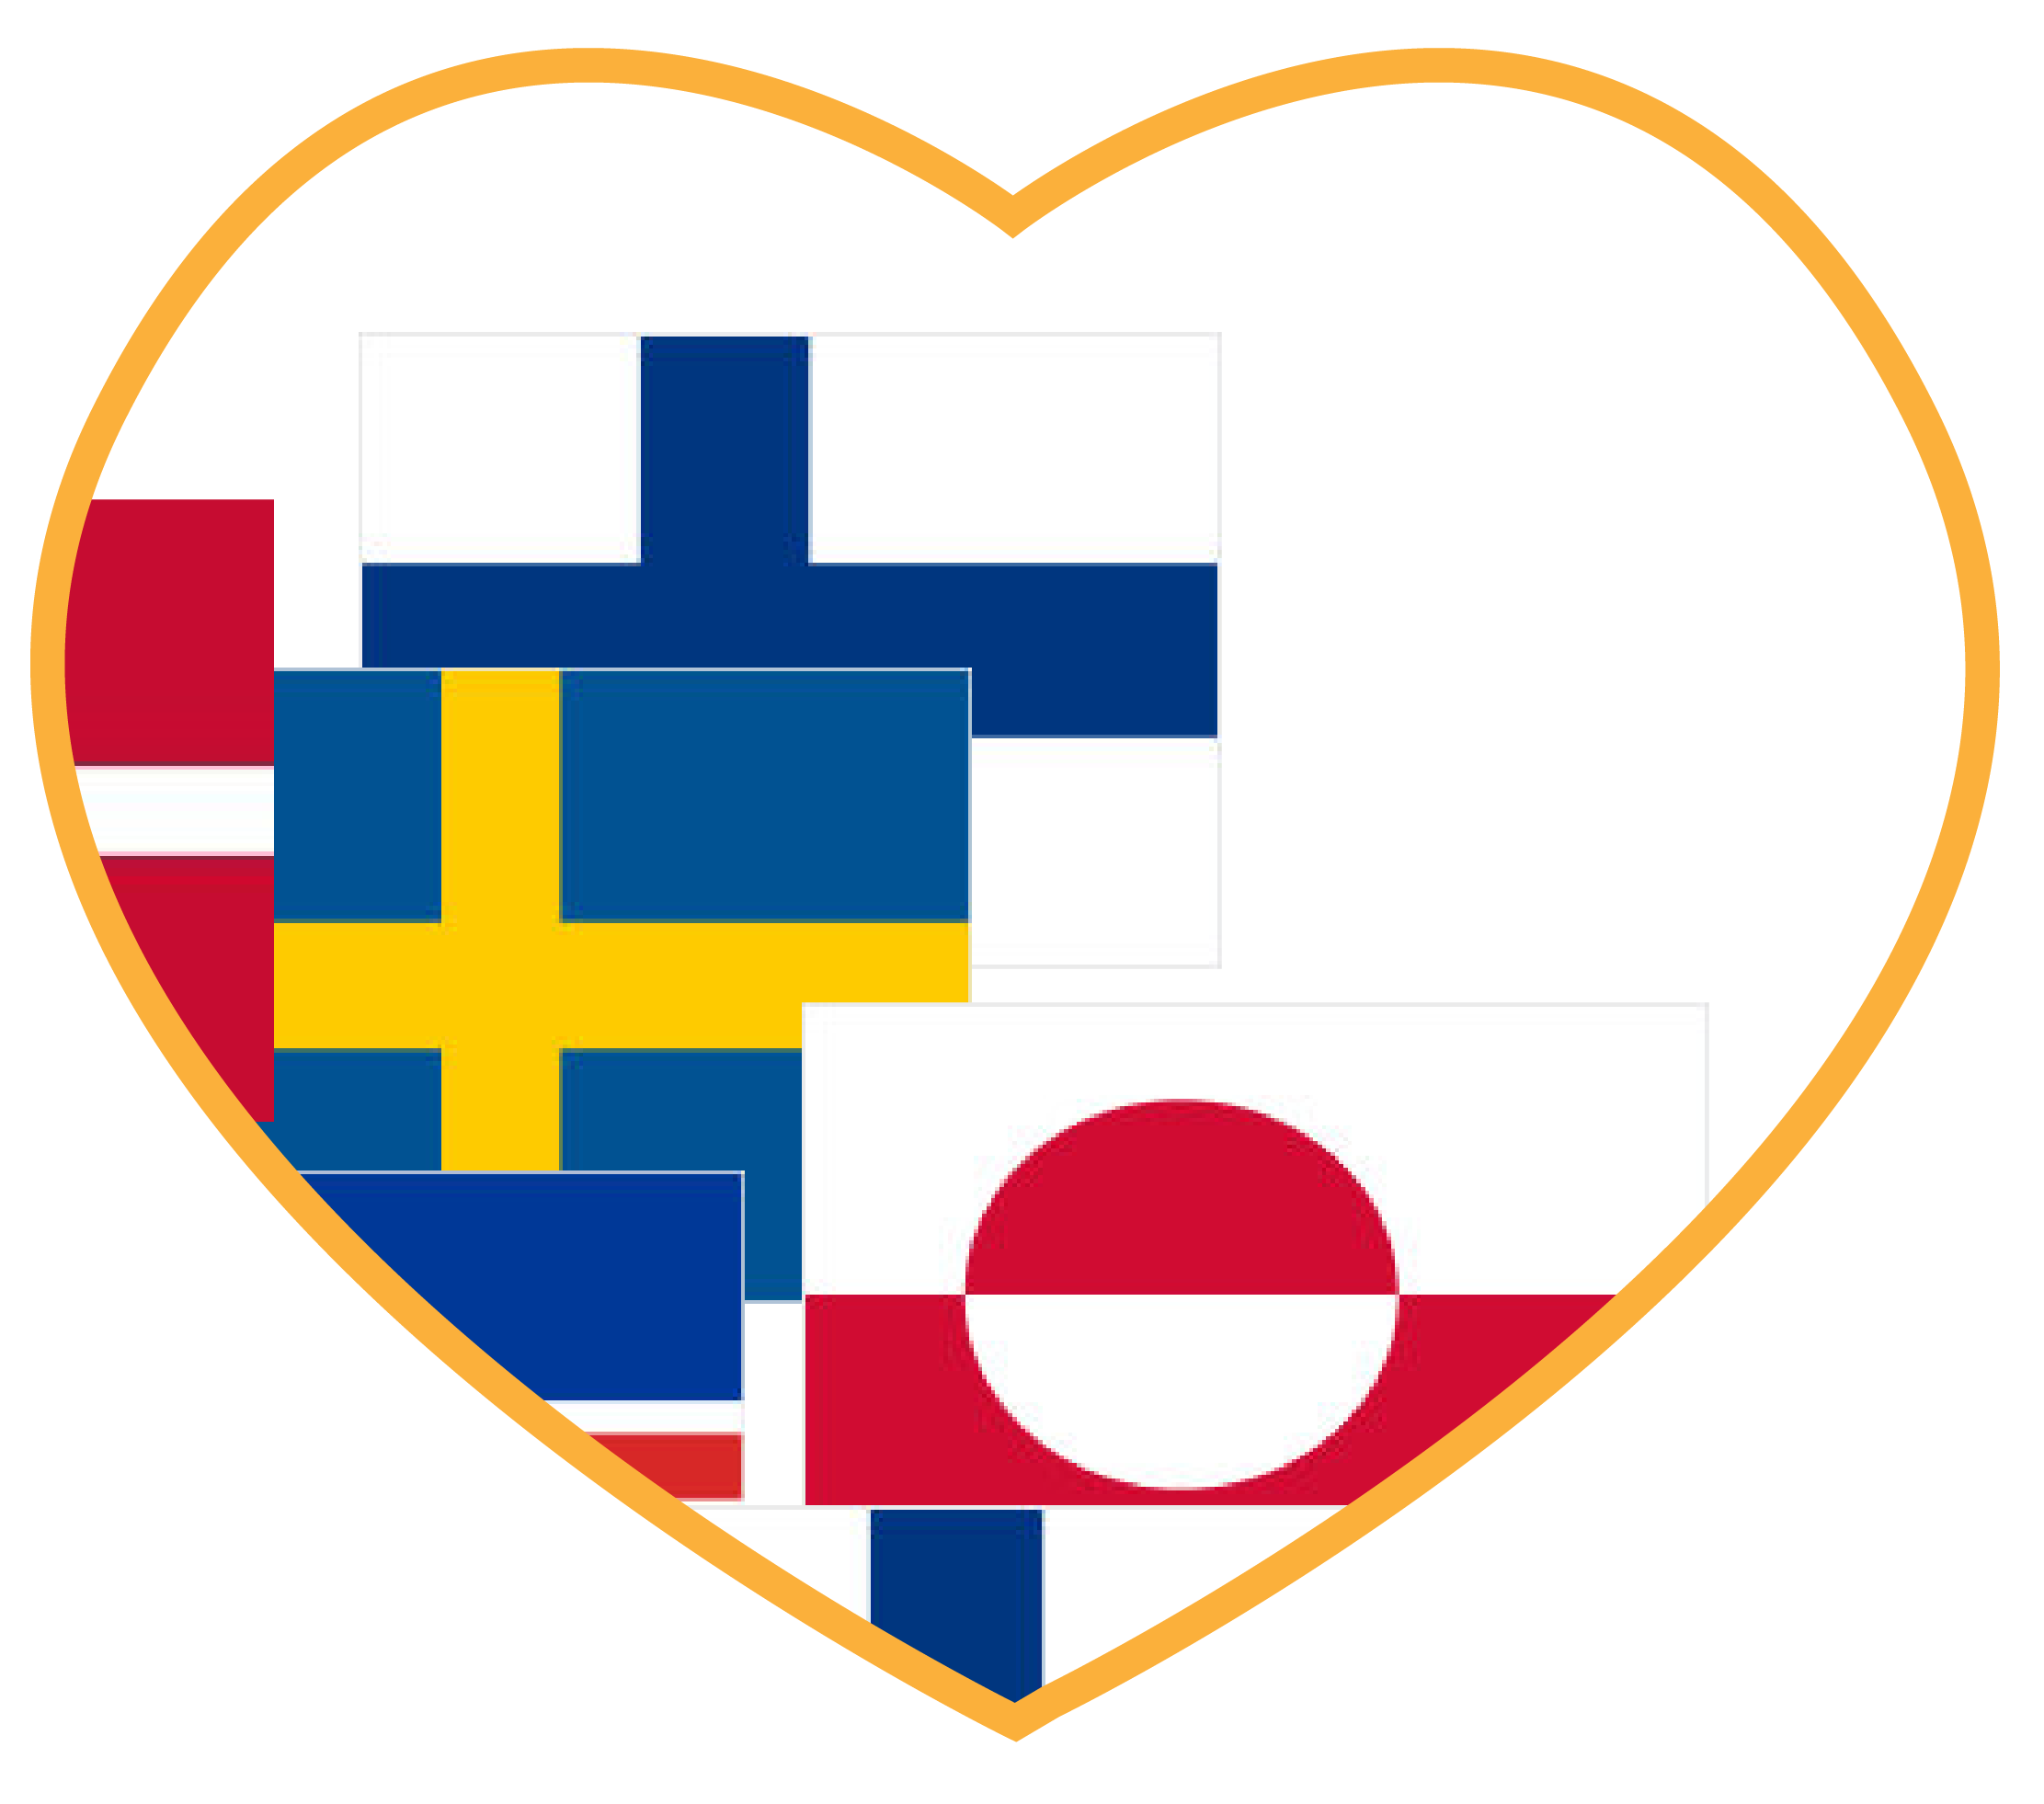 Picture of Heart with Nordic and Baltics flags inside. Photo Credits: ABS Coordination Office.